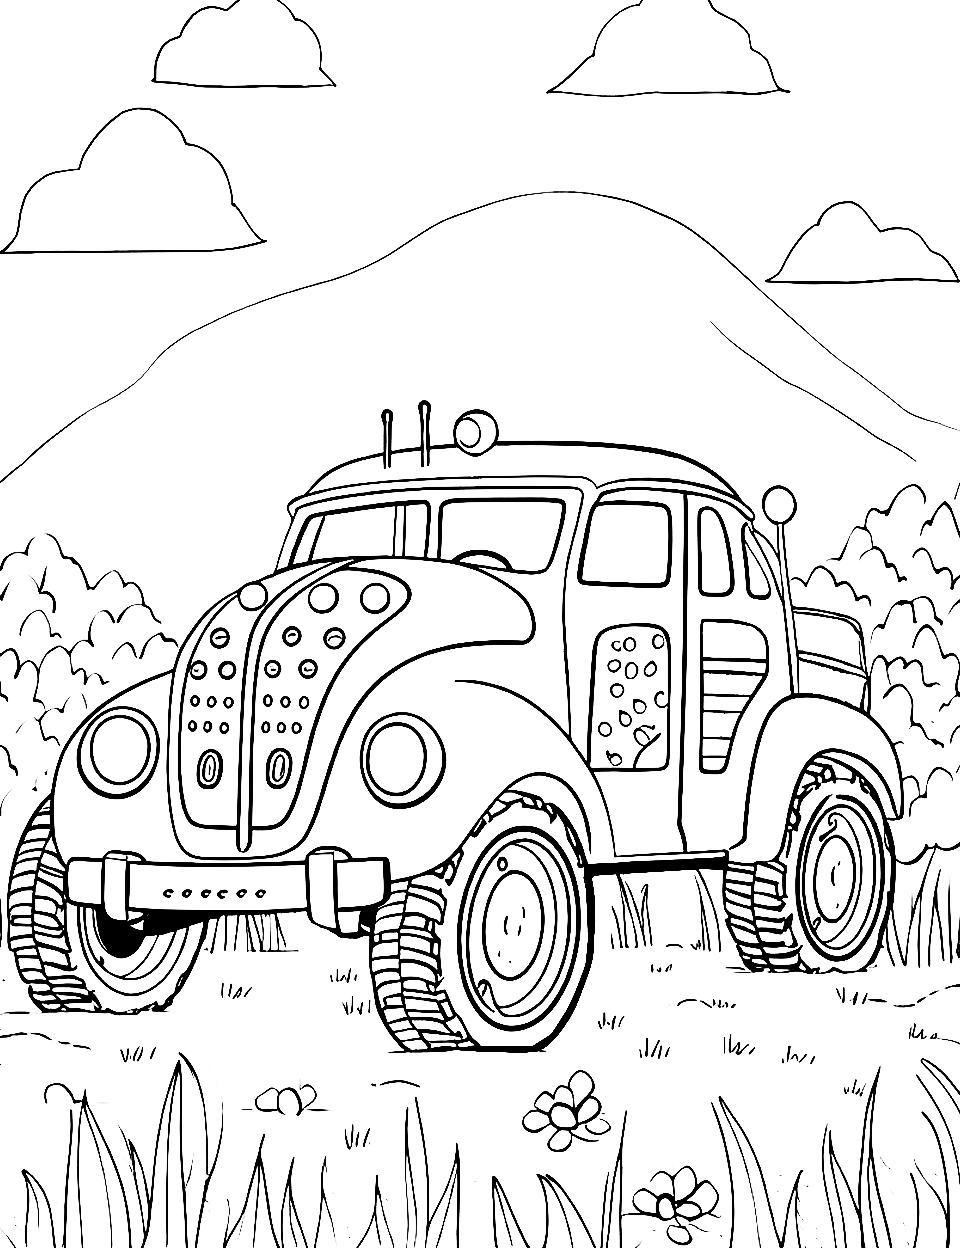 Ladybug Lane Monster Truck Coloring Page - A ladybug-themed monster truck parked in a garden.